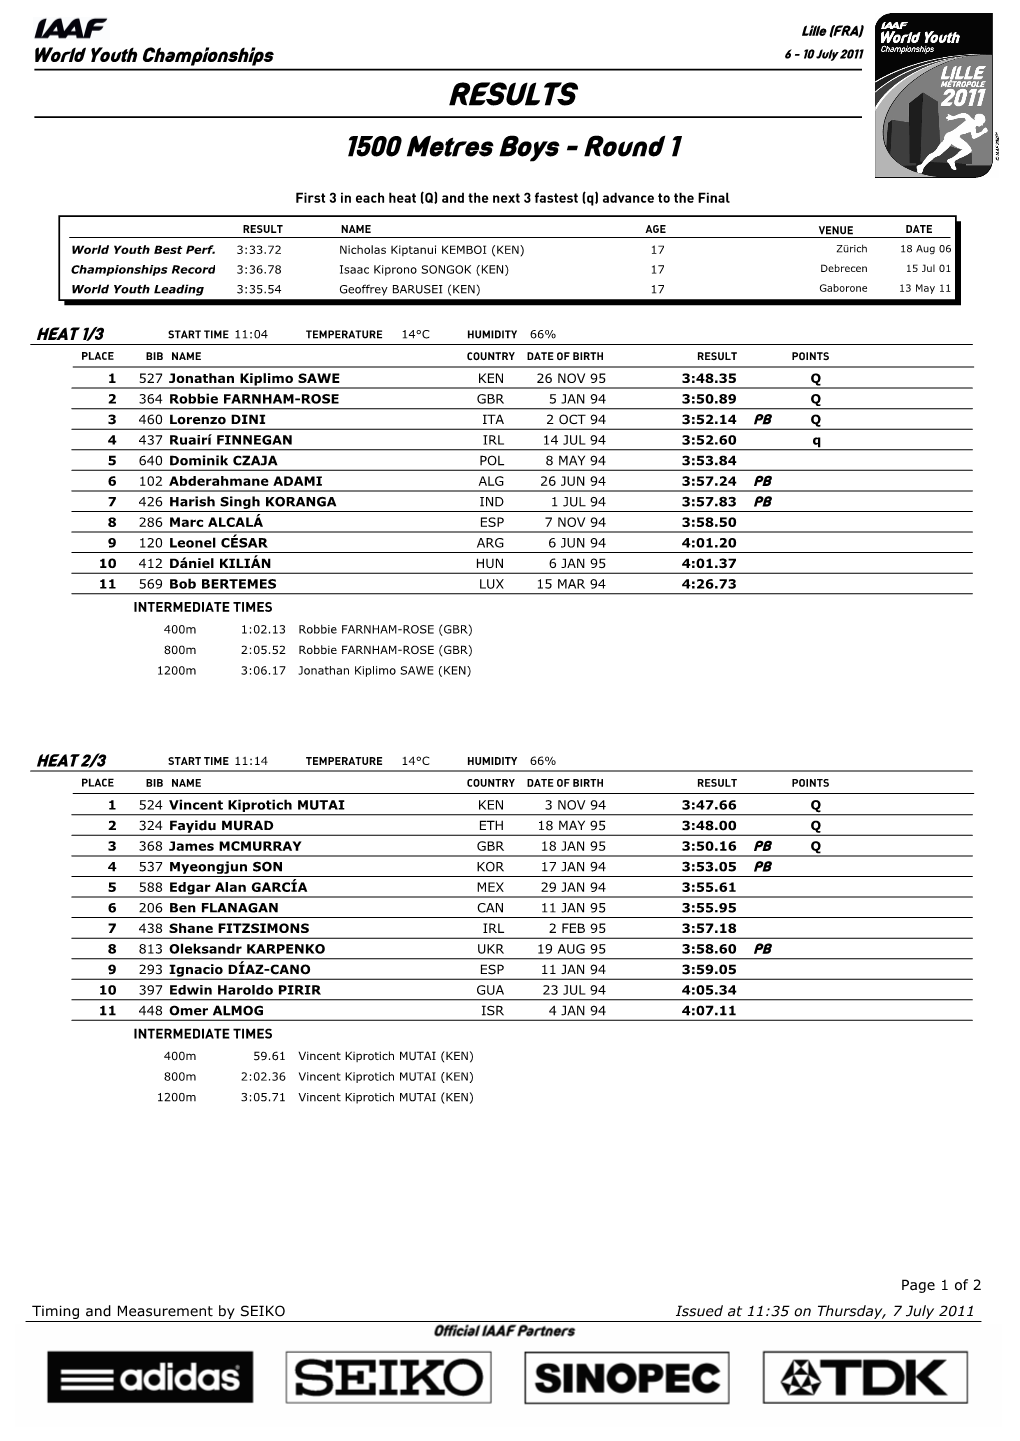 RESULTS 1500 Metres Boys - Round 1